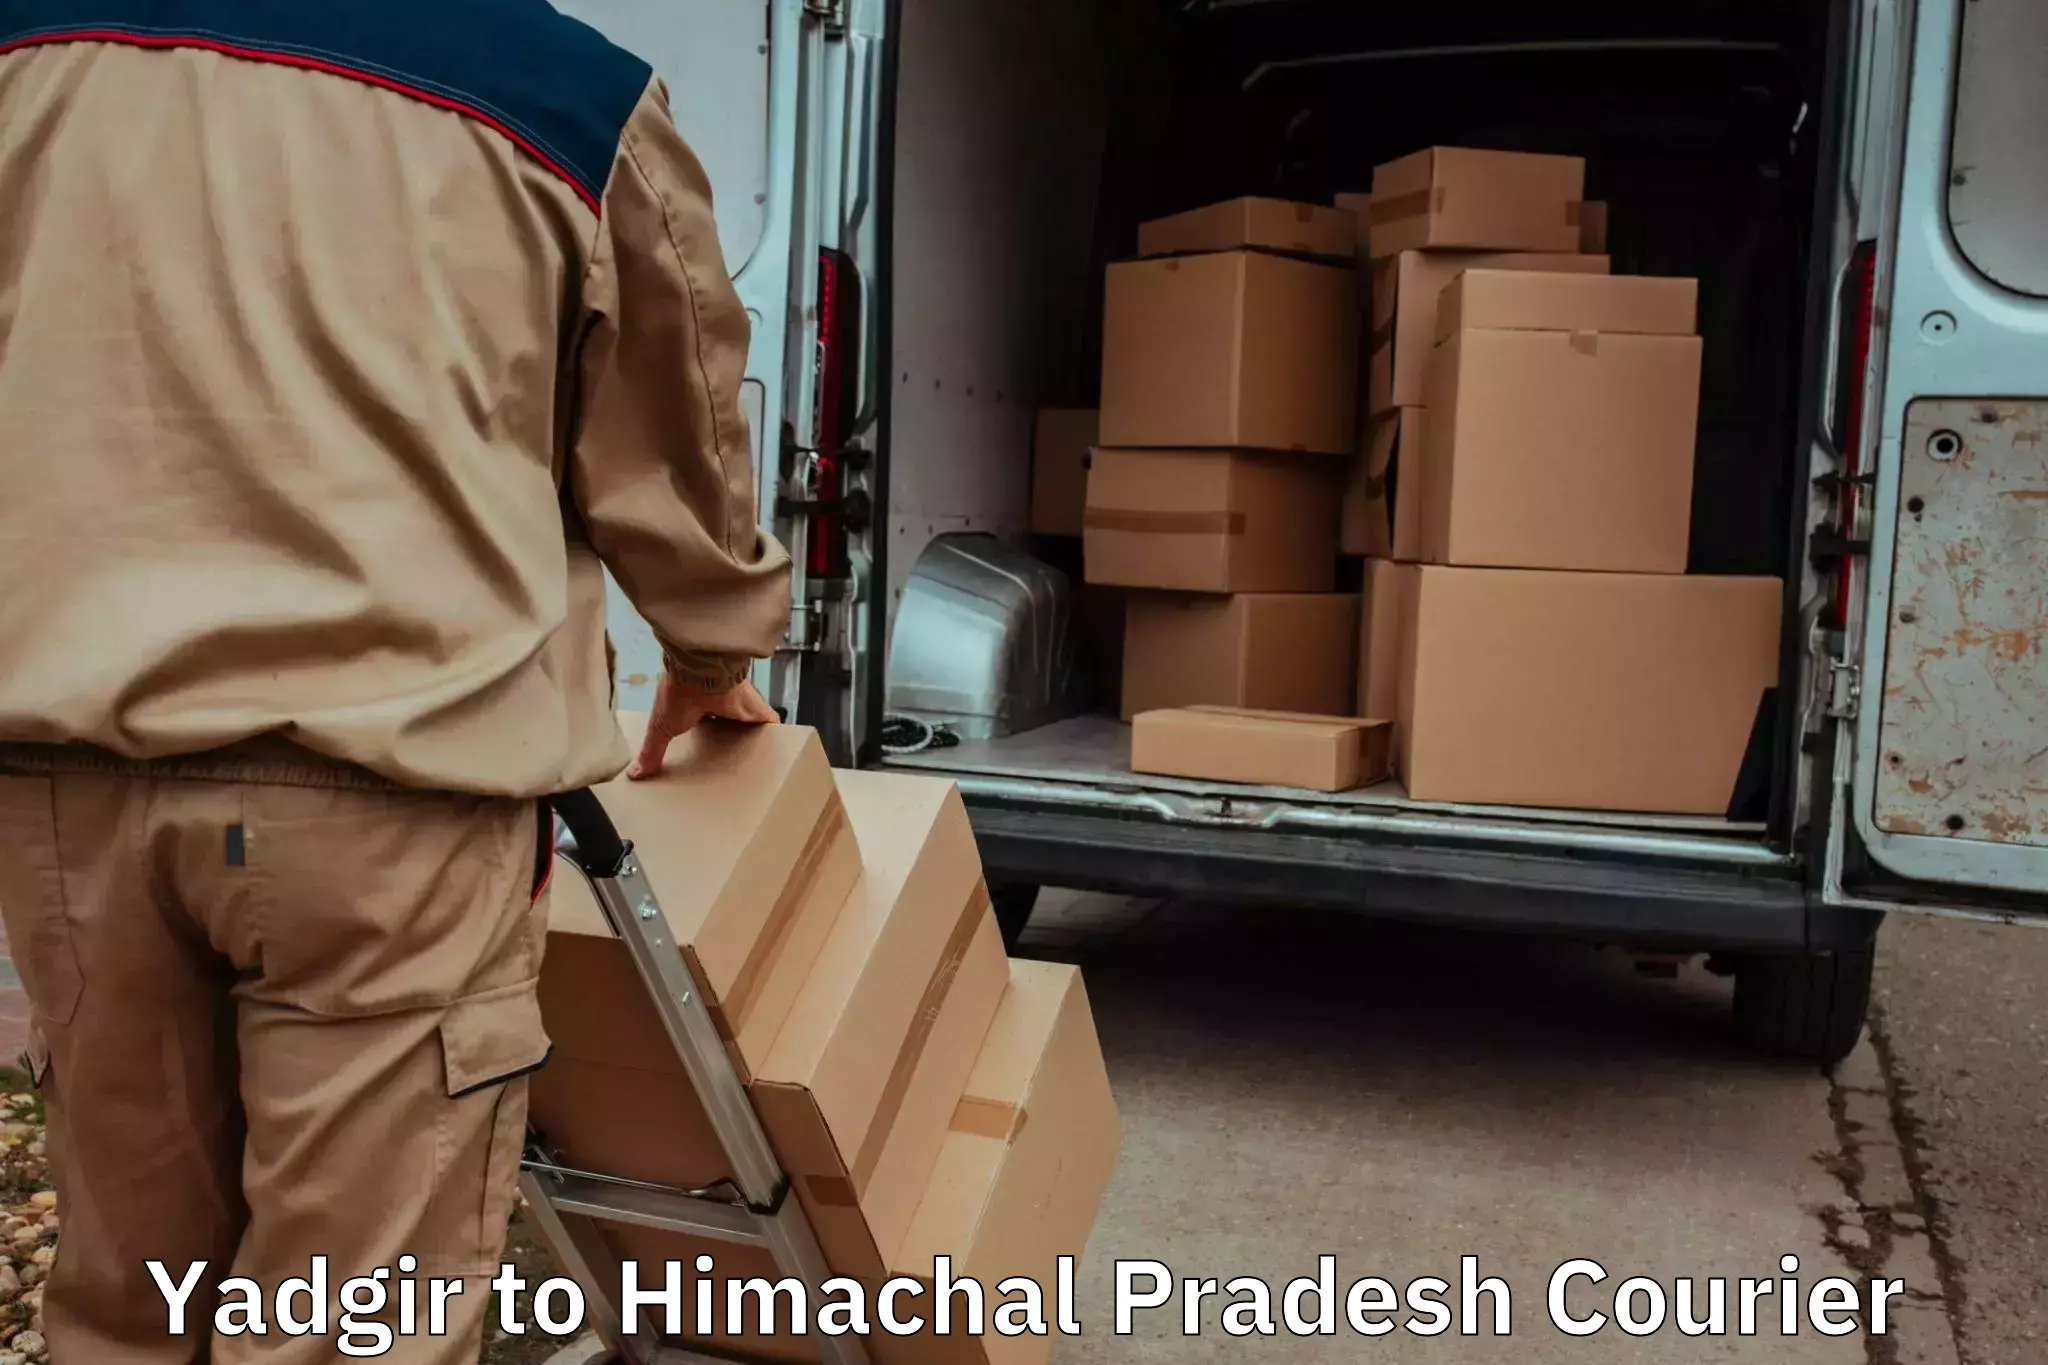 Trusted moving company Yadgir to Una